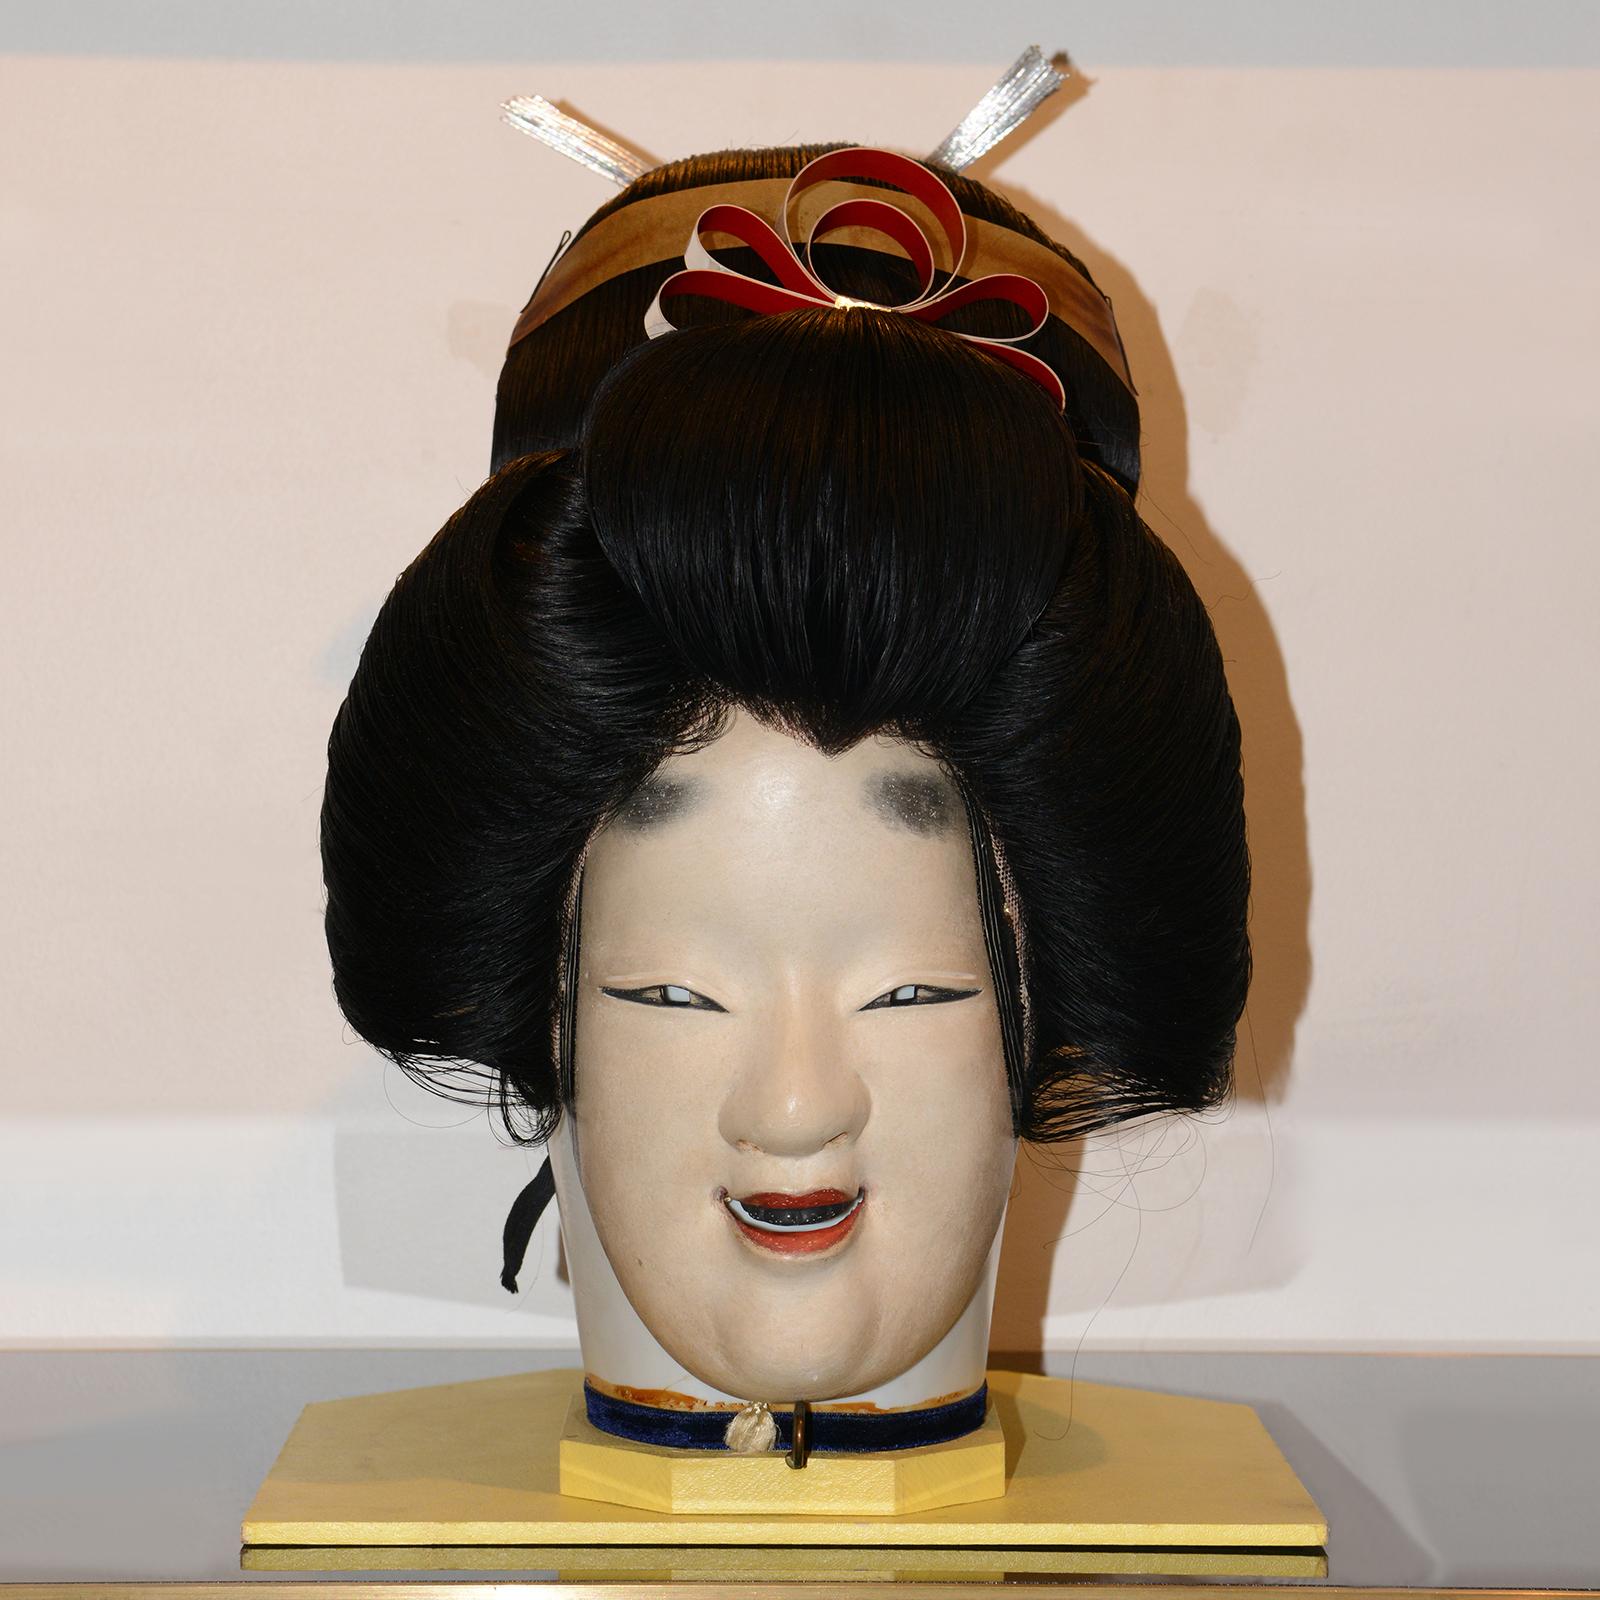 Mask Geisha Wig & Nô Theater 1, with real natural hair Geisha wig
on head model and with Nô Theater white painted wood mask.
Measures: Base: 28,5 x 26,3cm.